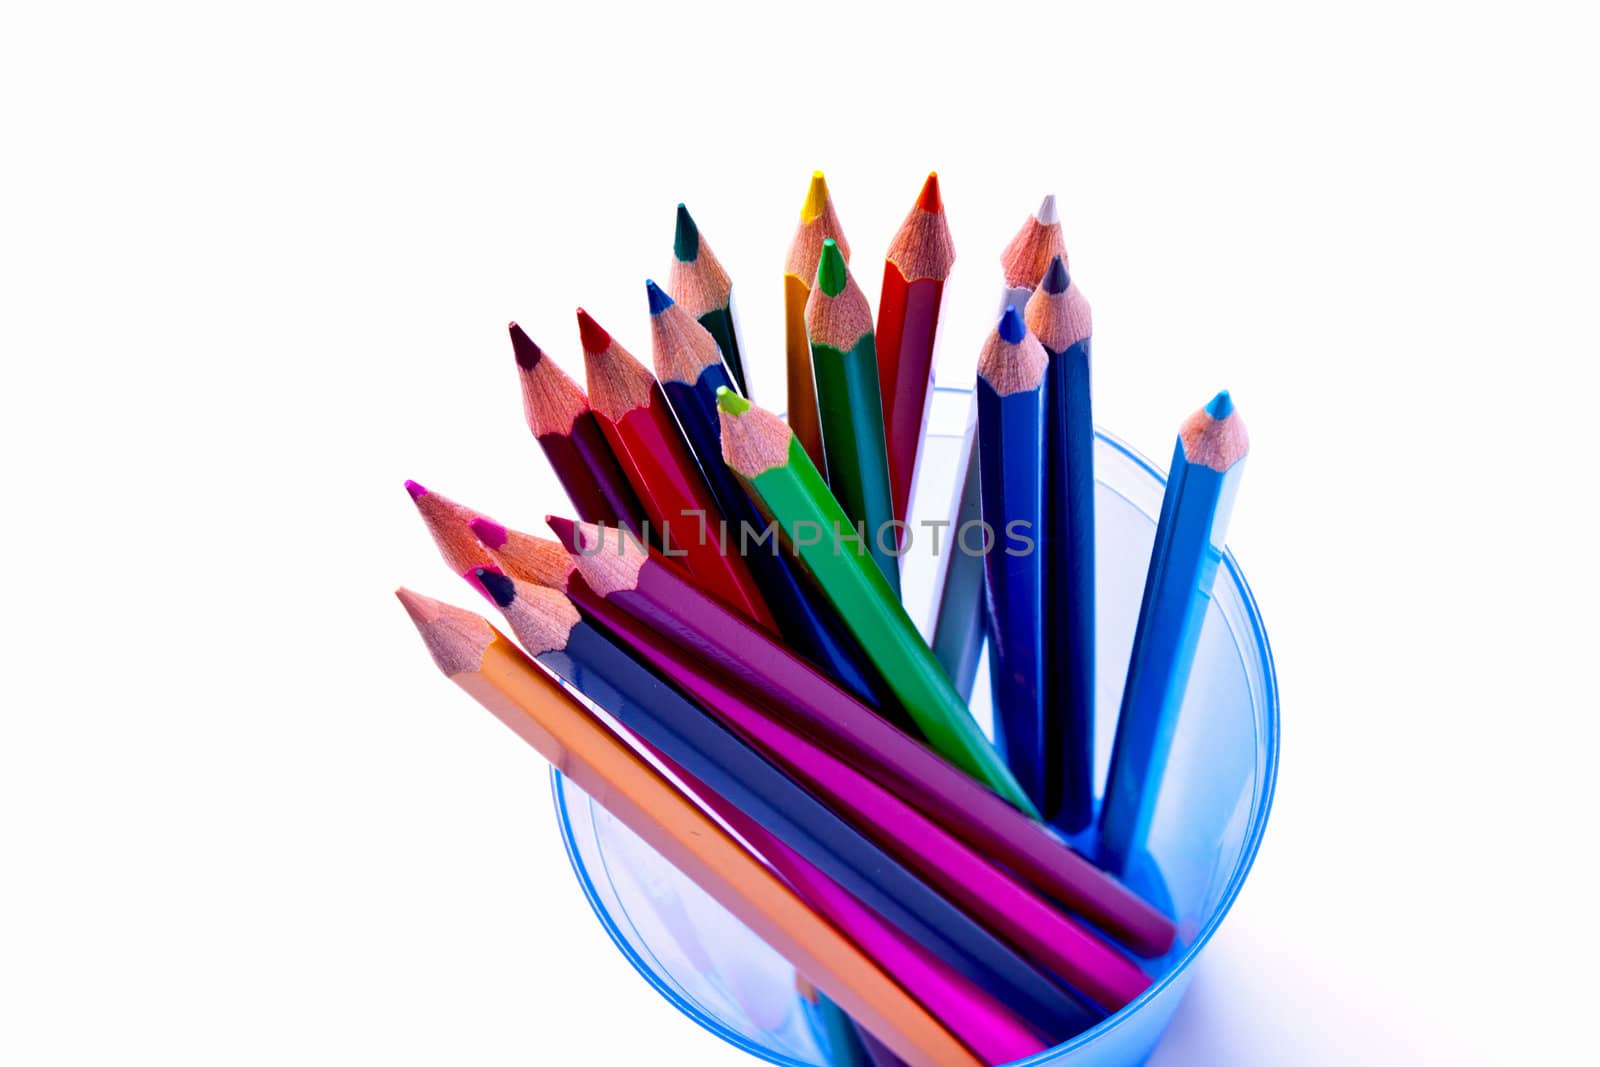 colored pencils on a light background by aziatik13